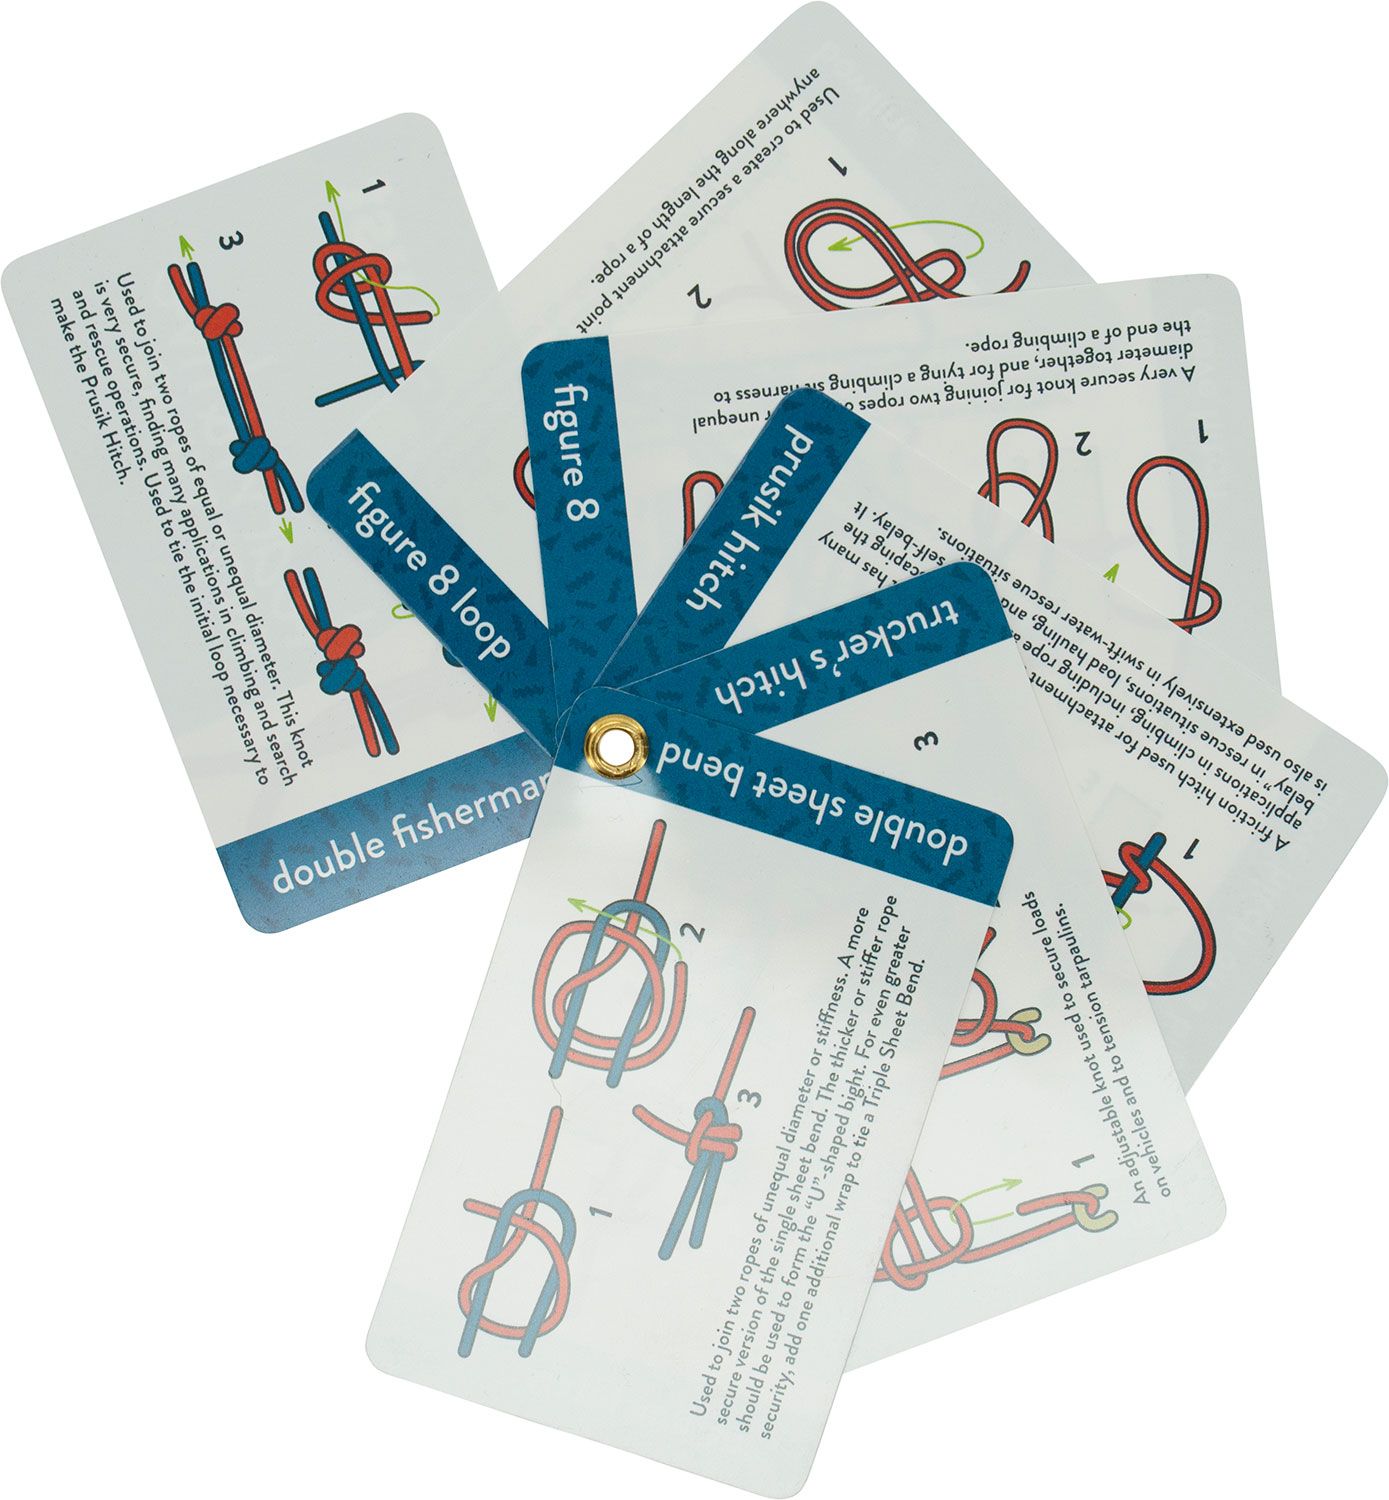 Learn the Basics Knot Tying Kit with Waterproof Reference Cards - SGT  KNOTS, Knot Tying Kit 